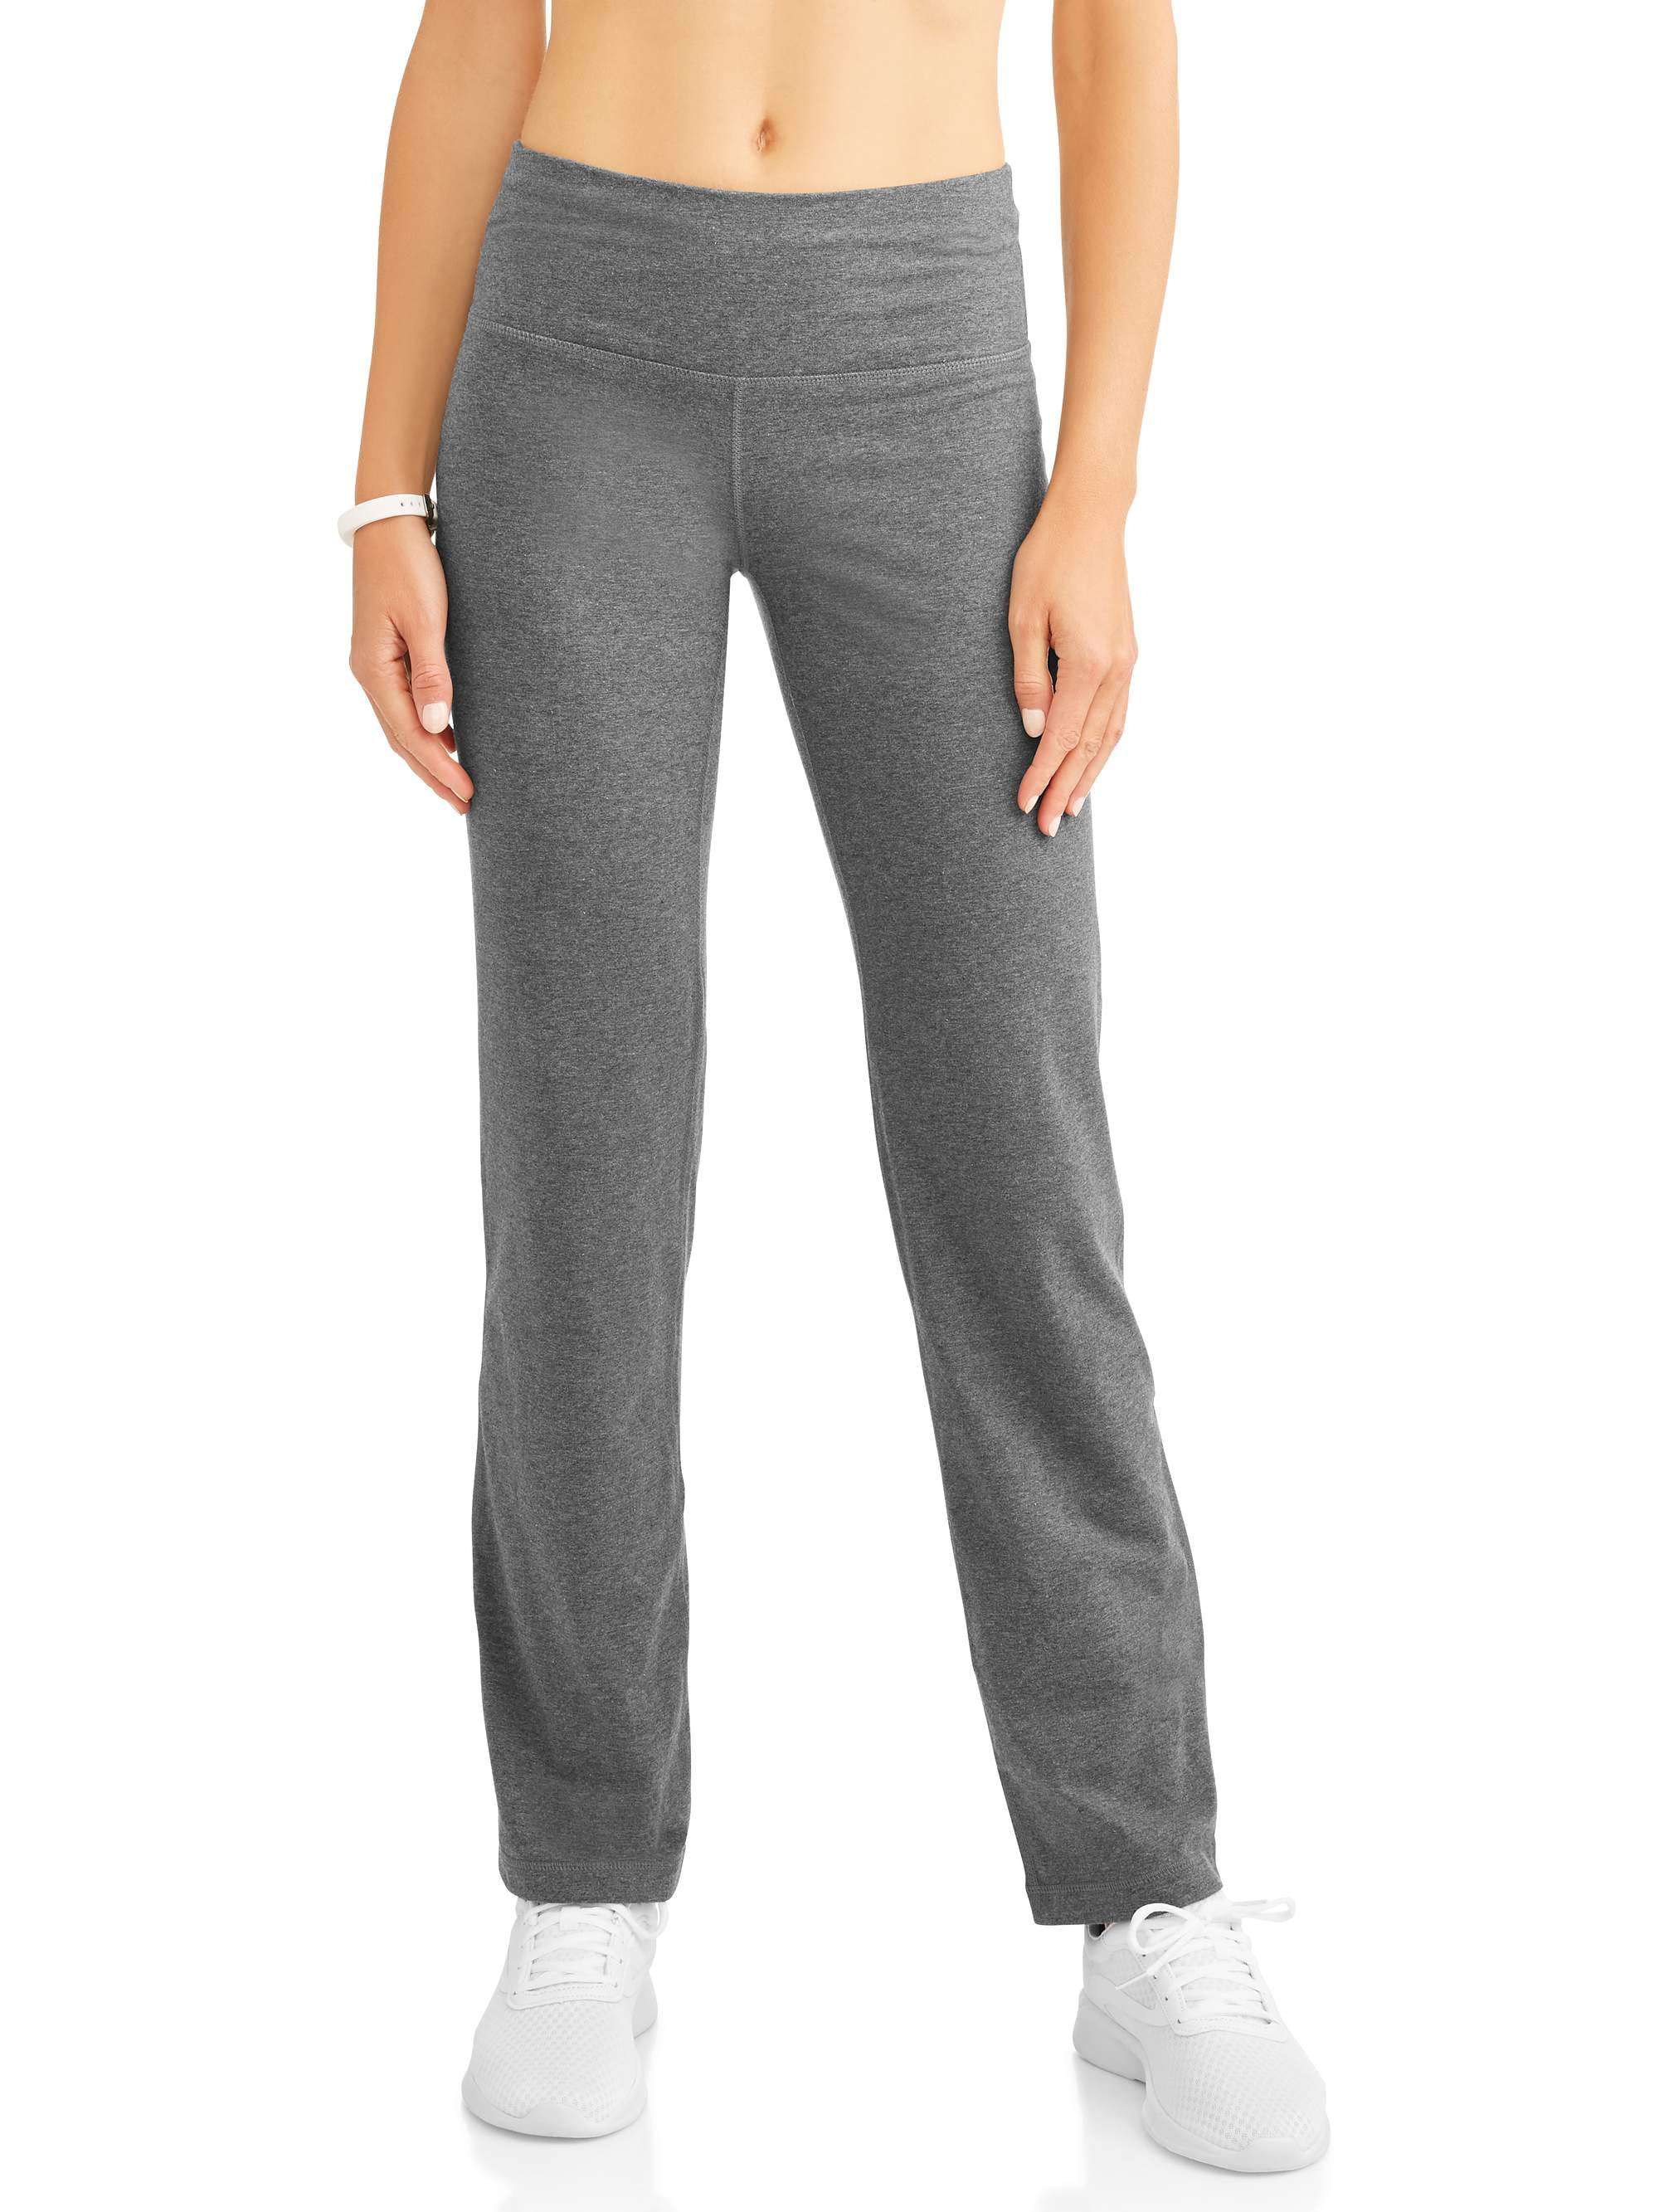 Athletic Works Athletic Works Women S Athleisure Performance Straight Leg Pant Available In Regular And Petite Walmart Com Walmart Com